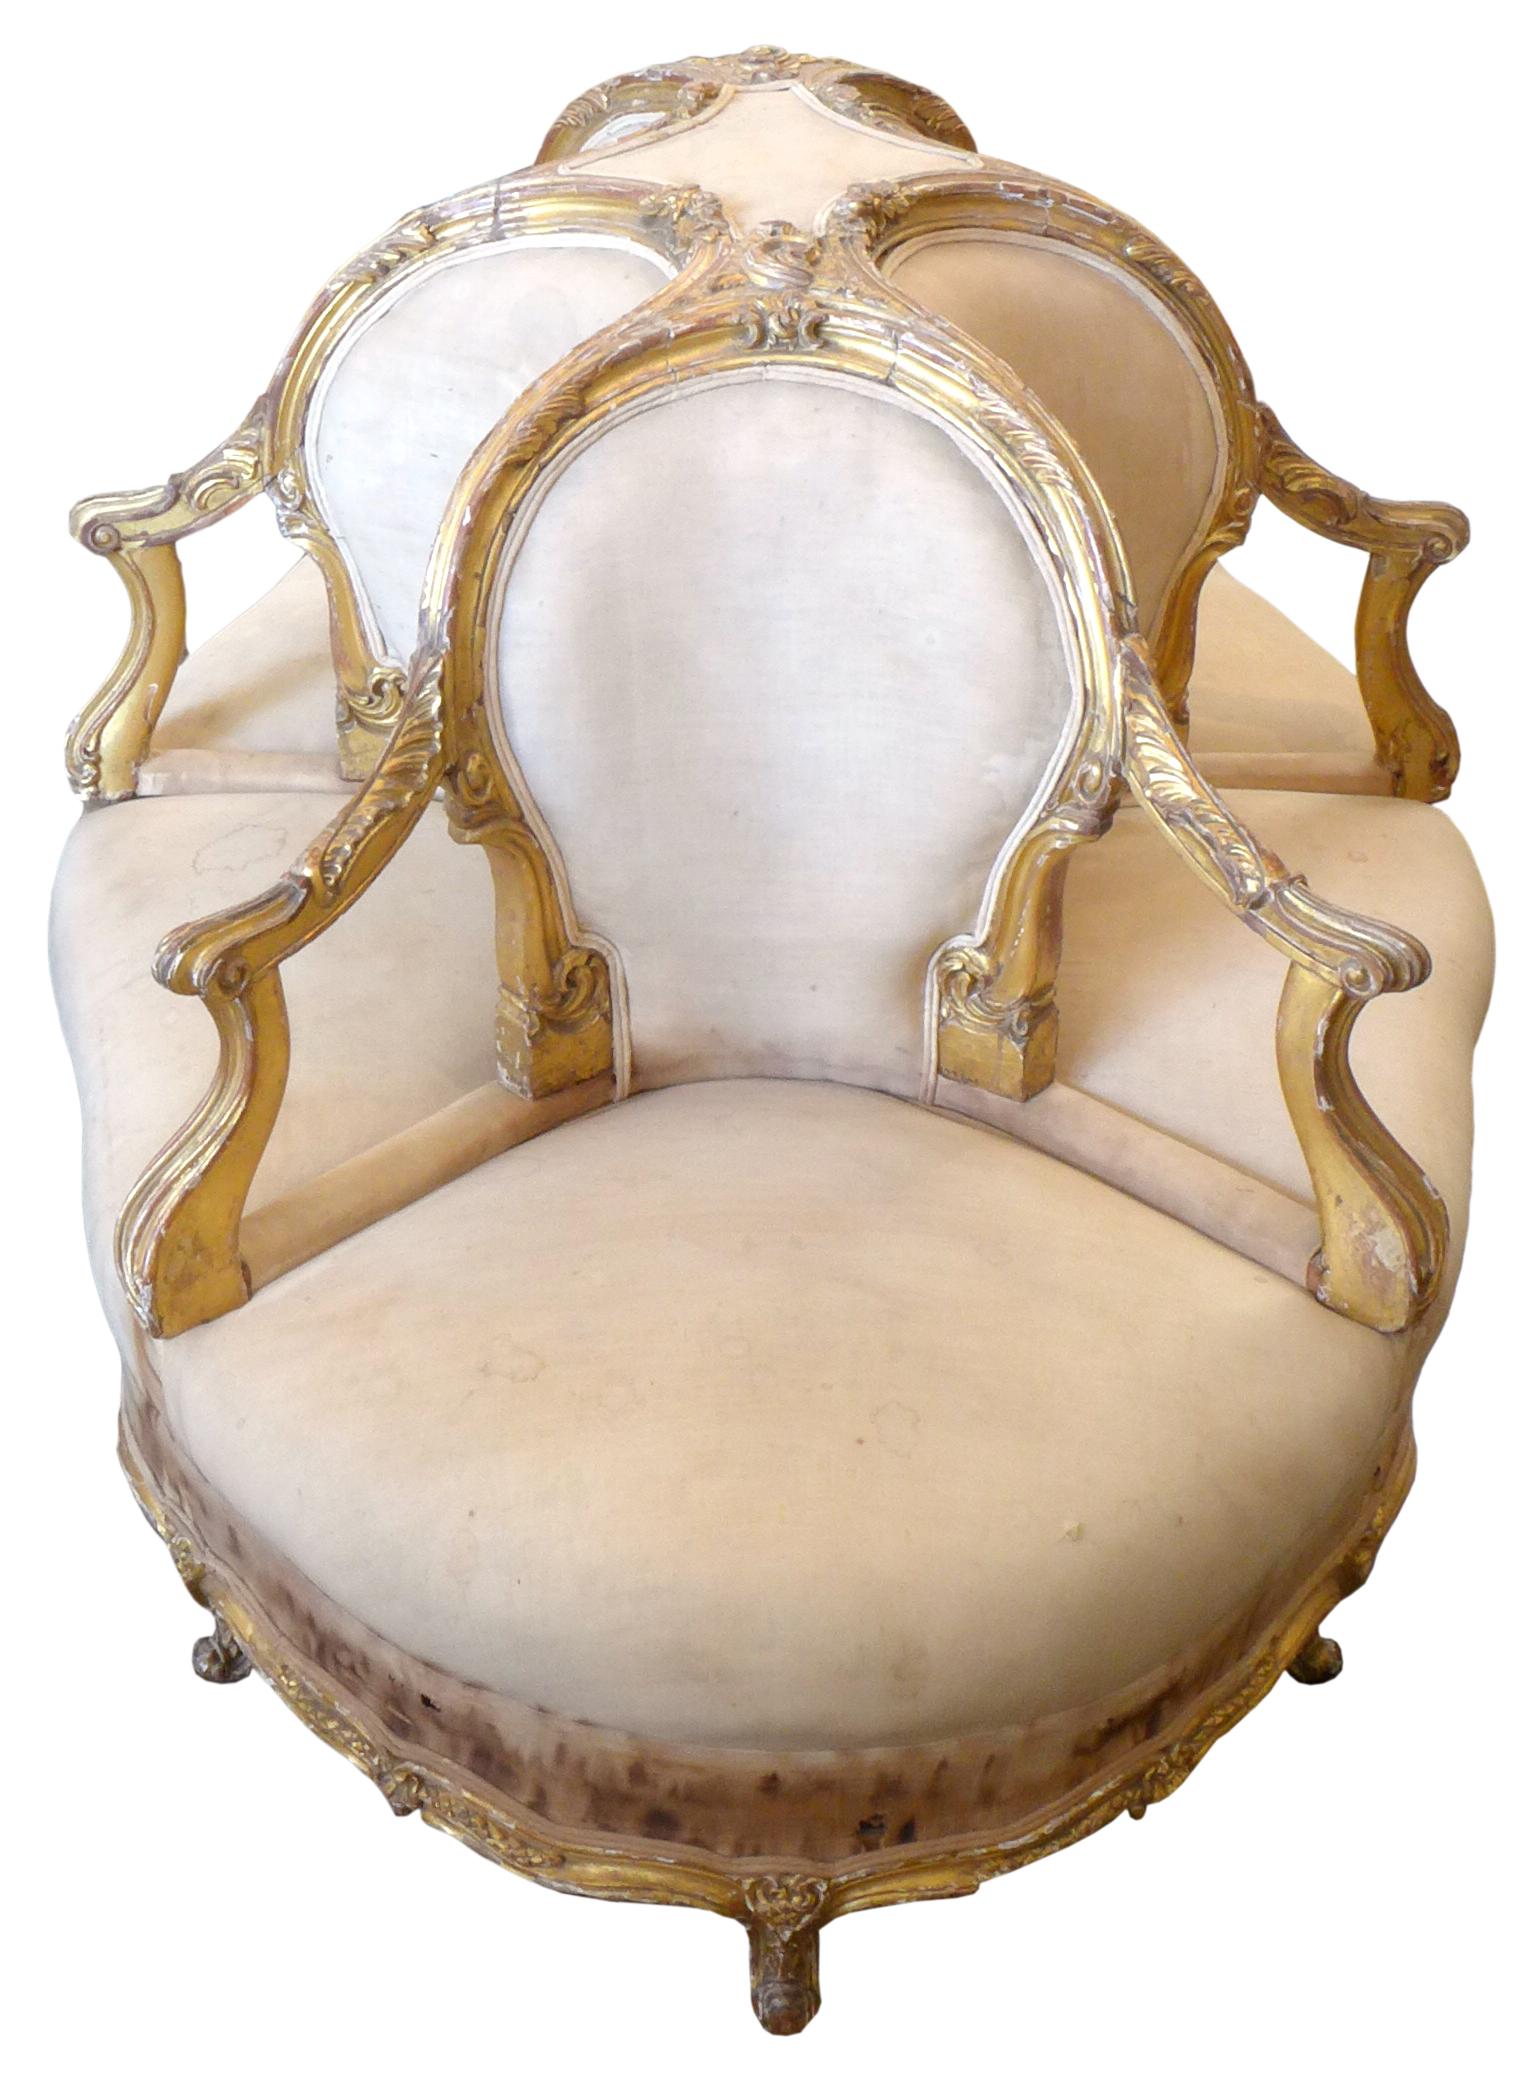 Hand-Carved Six-Seat 19th Century French Conversation Seat For Sale